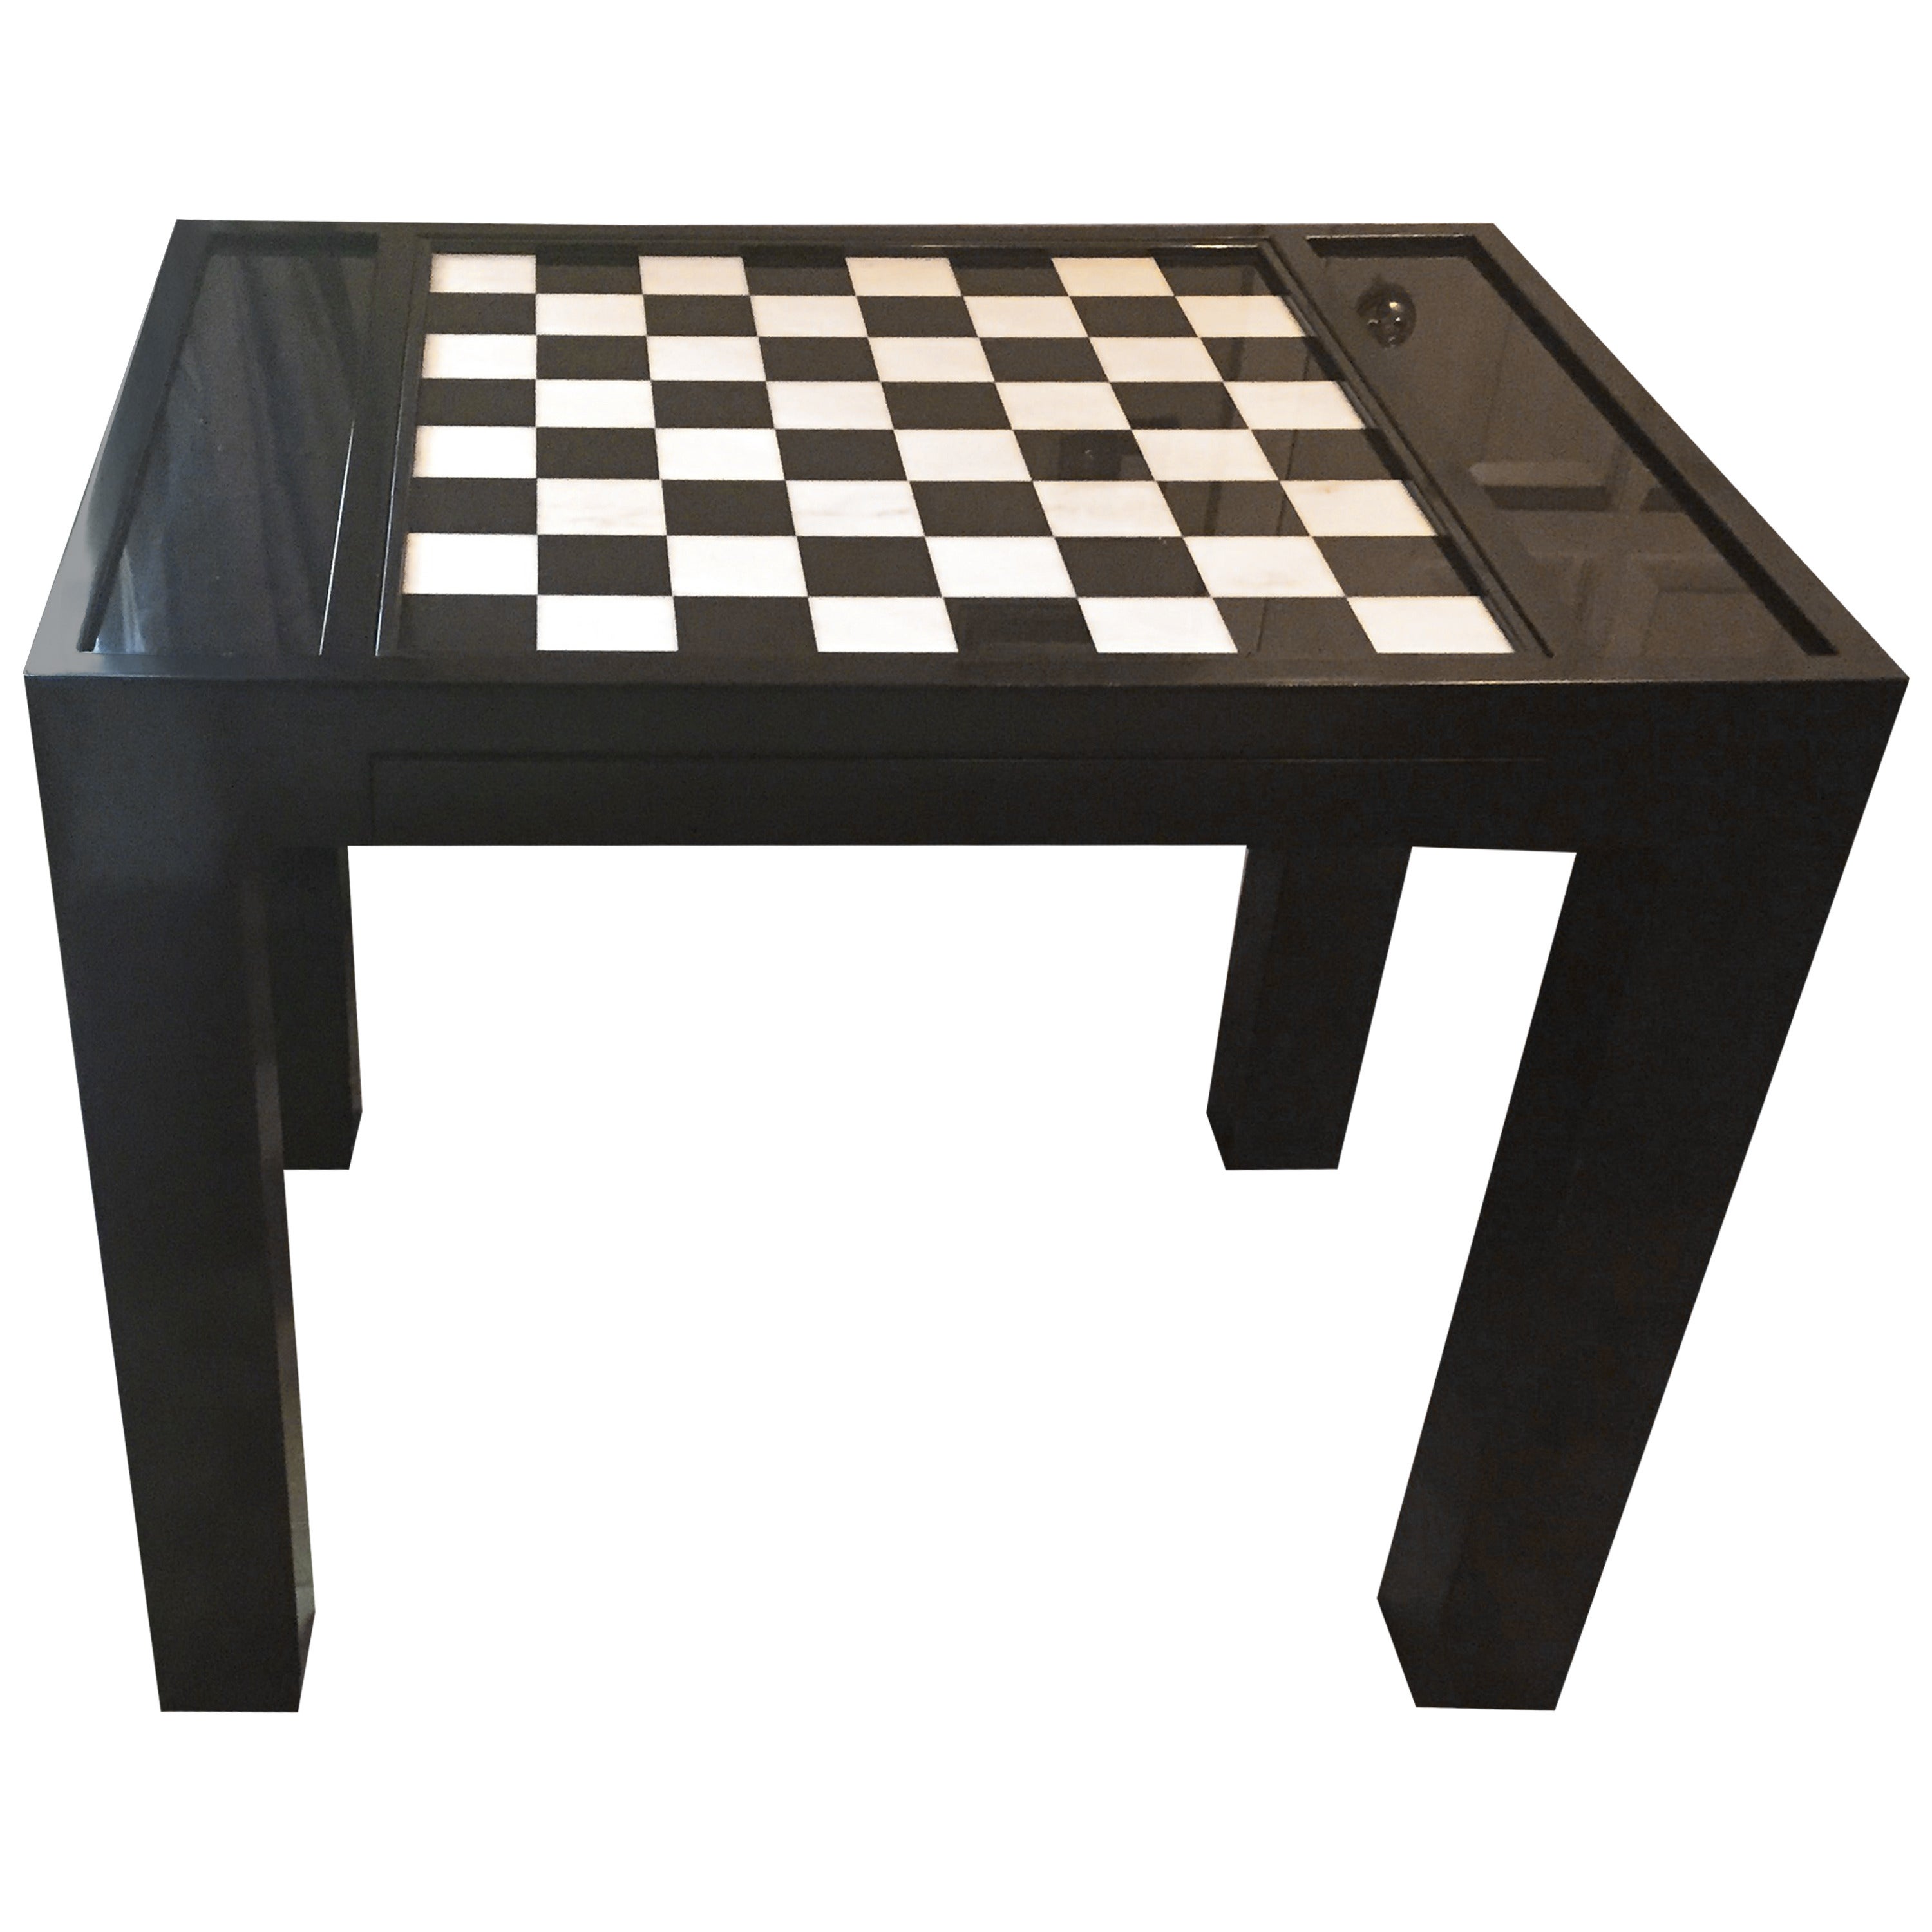 Mid-20th Century Chess or Games Table